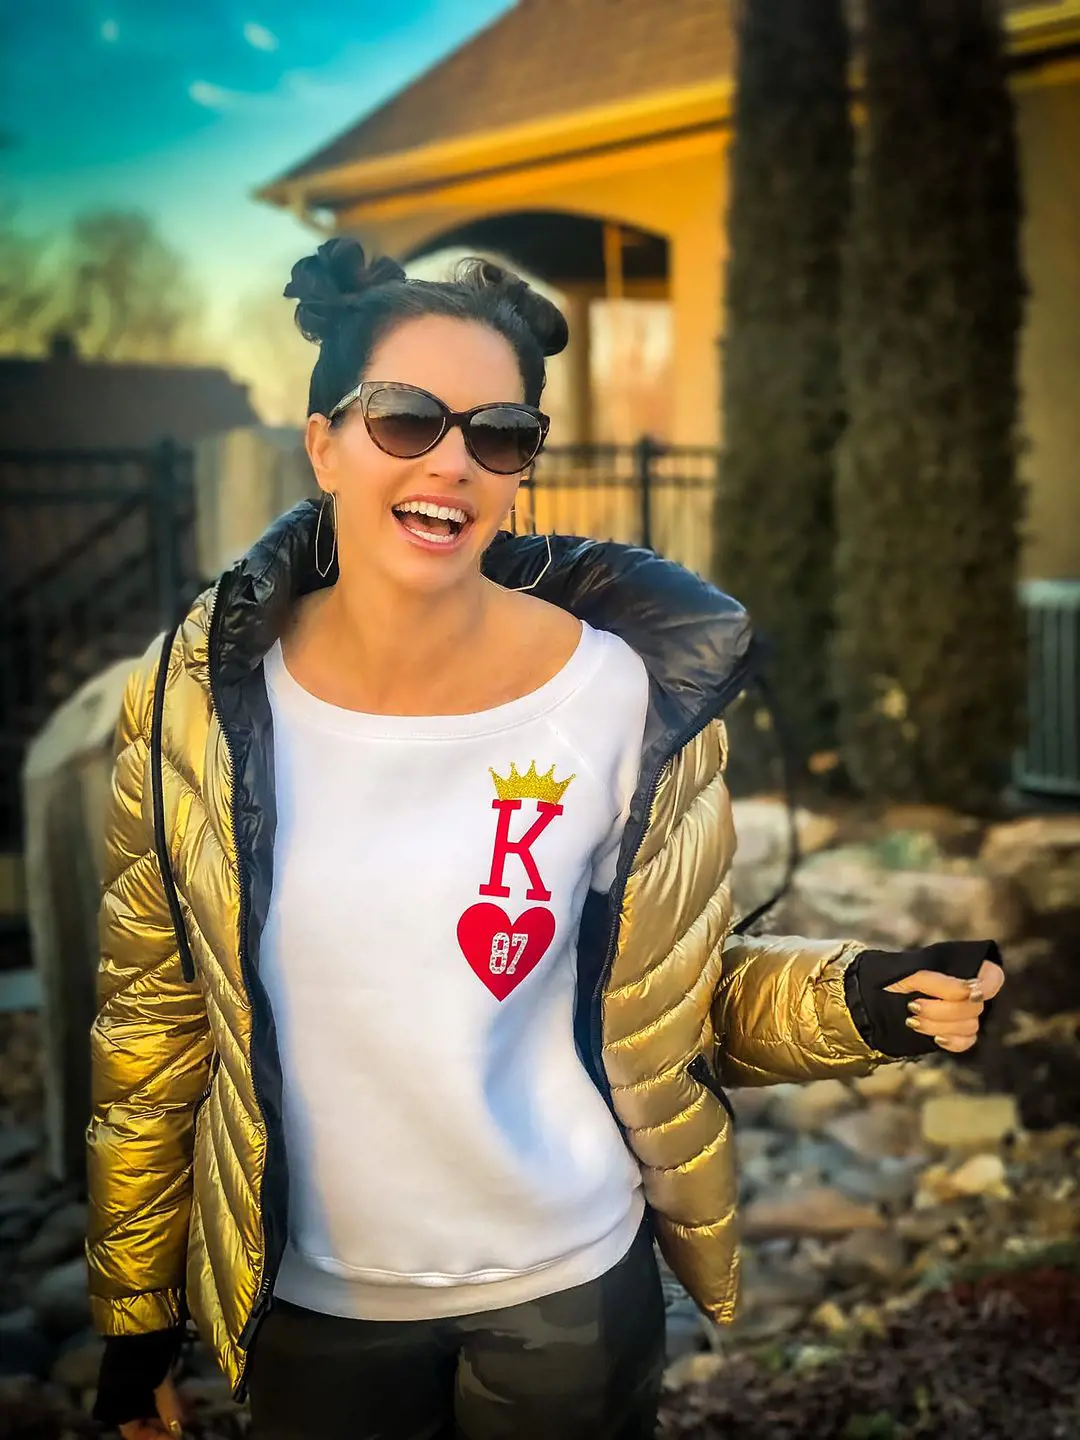 Danny with her new Chic Kelce King of Hearts sweatshirt